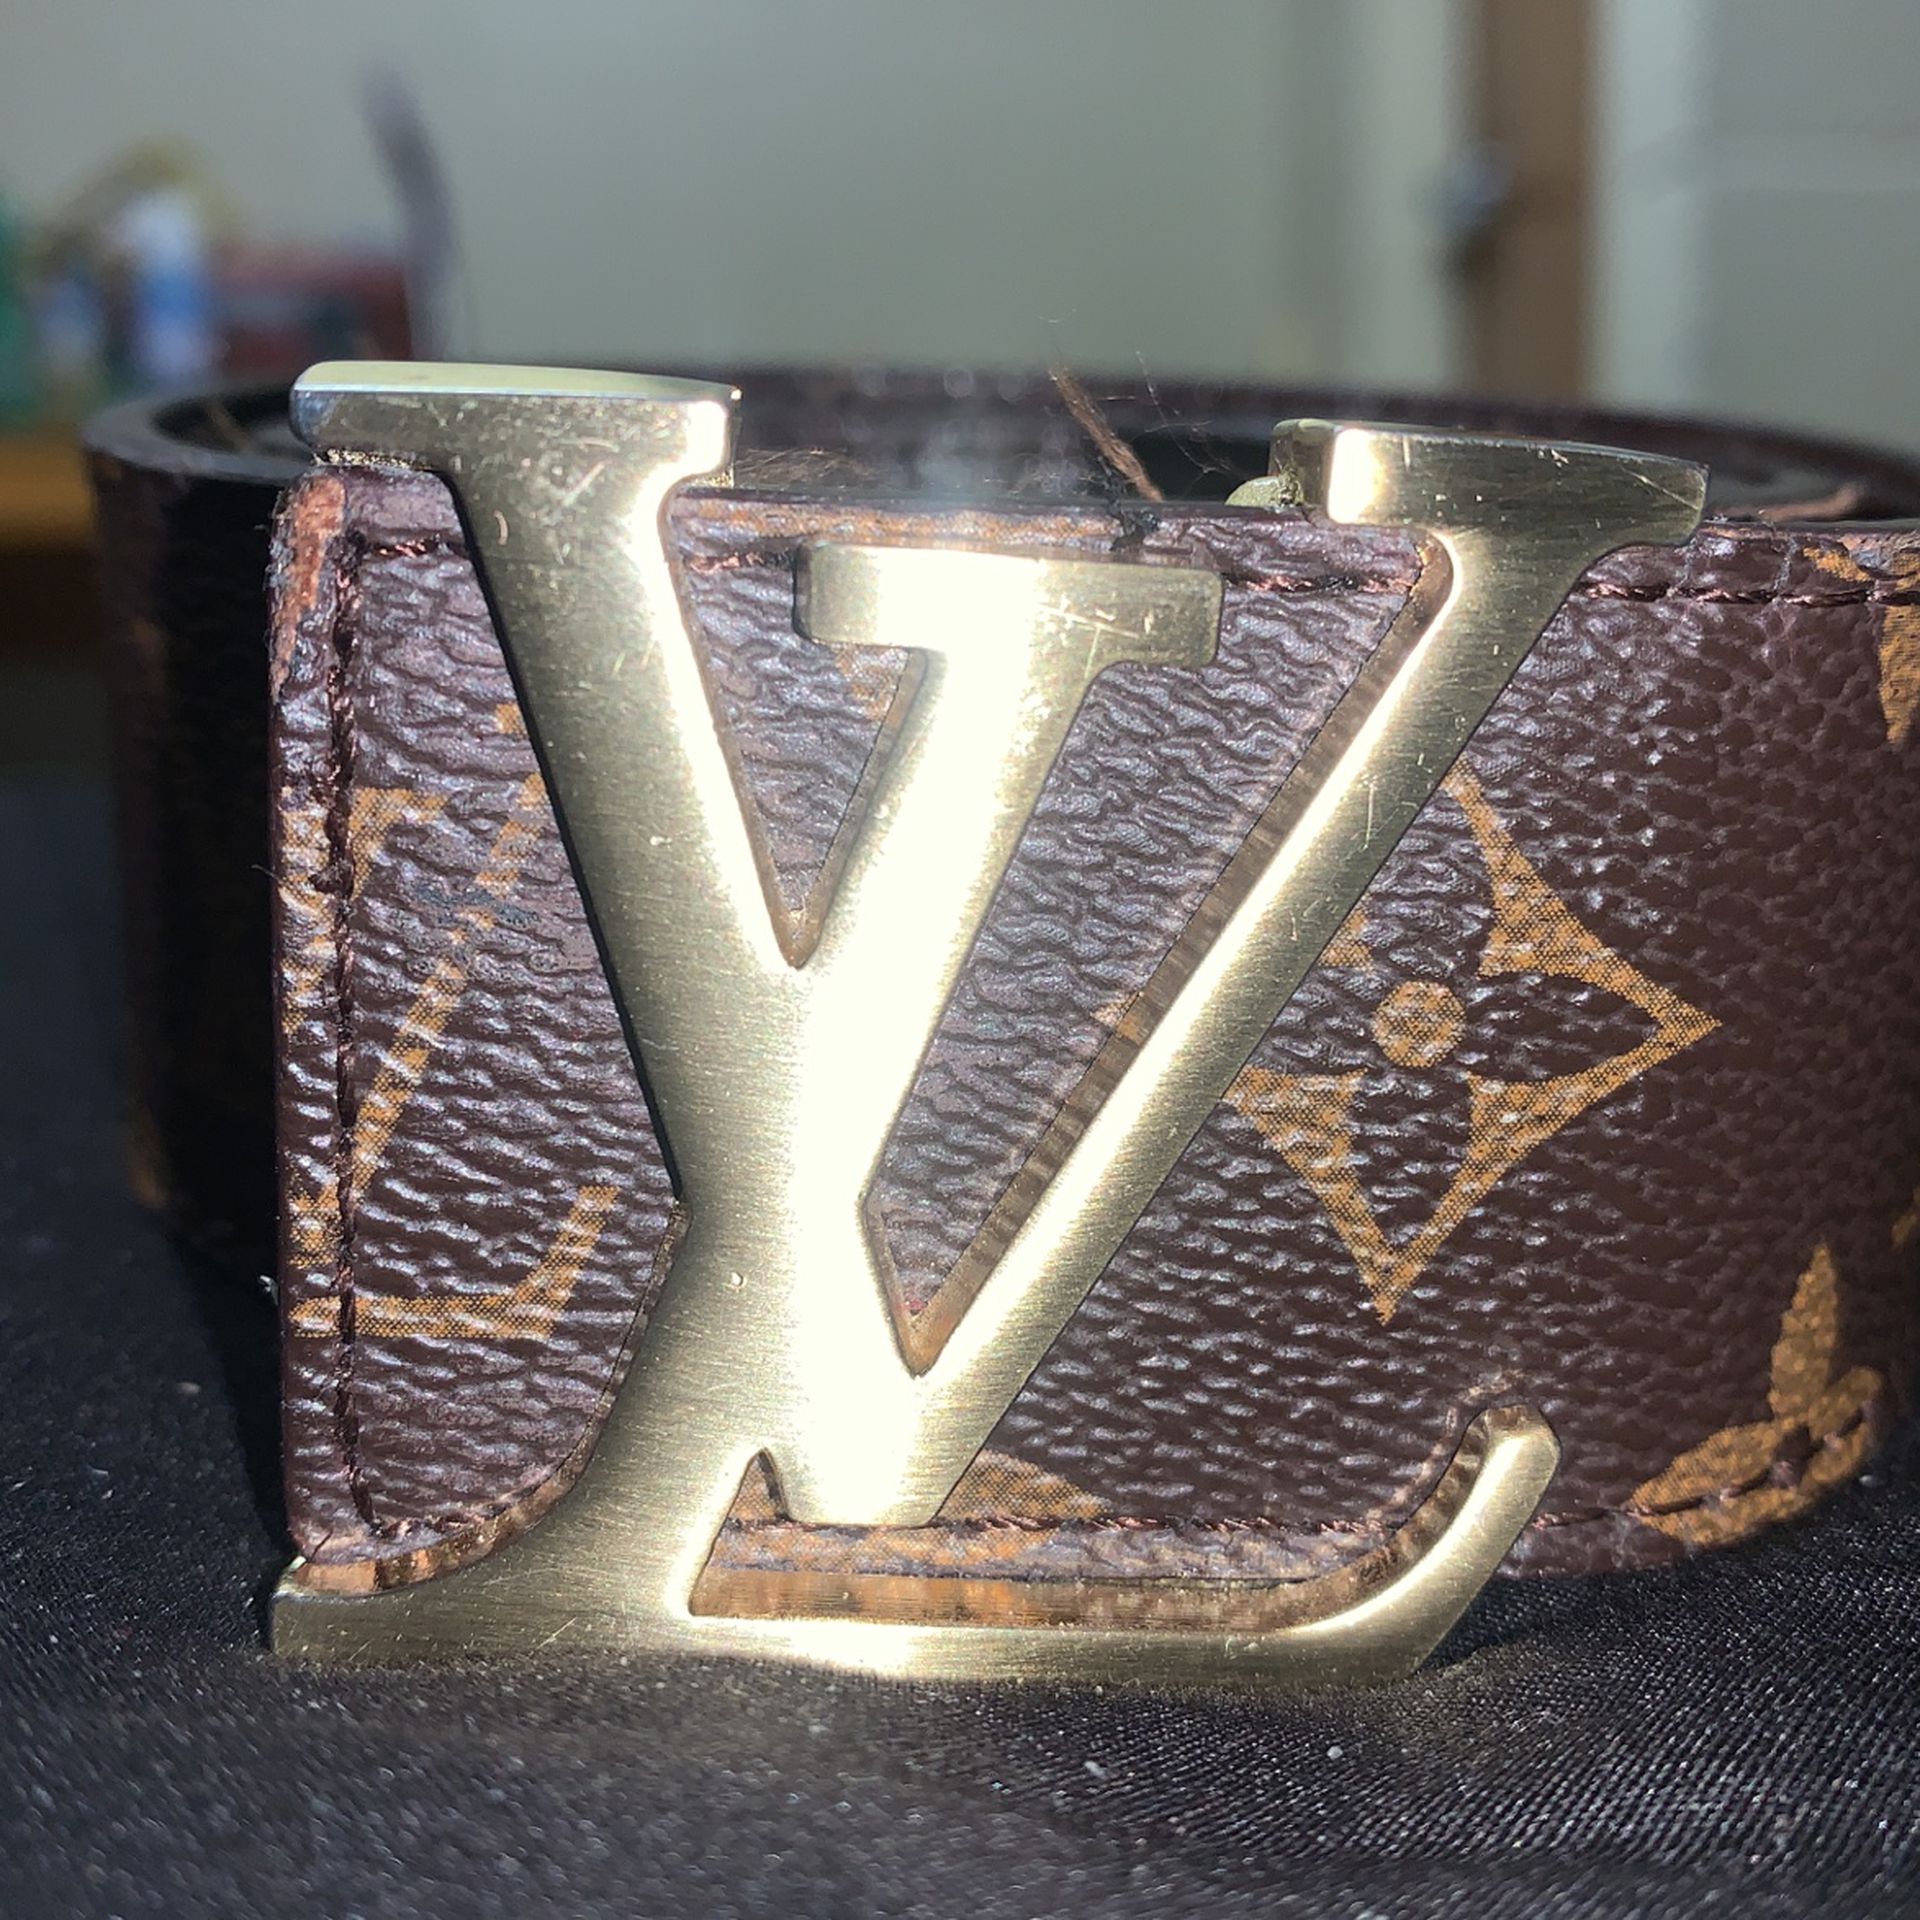 Louis Vuitton Monogram Sandals for Sale in Charlotte, NC - OfferUp